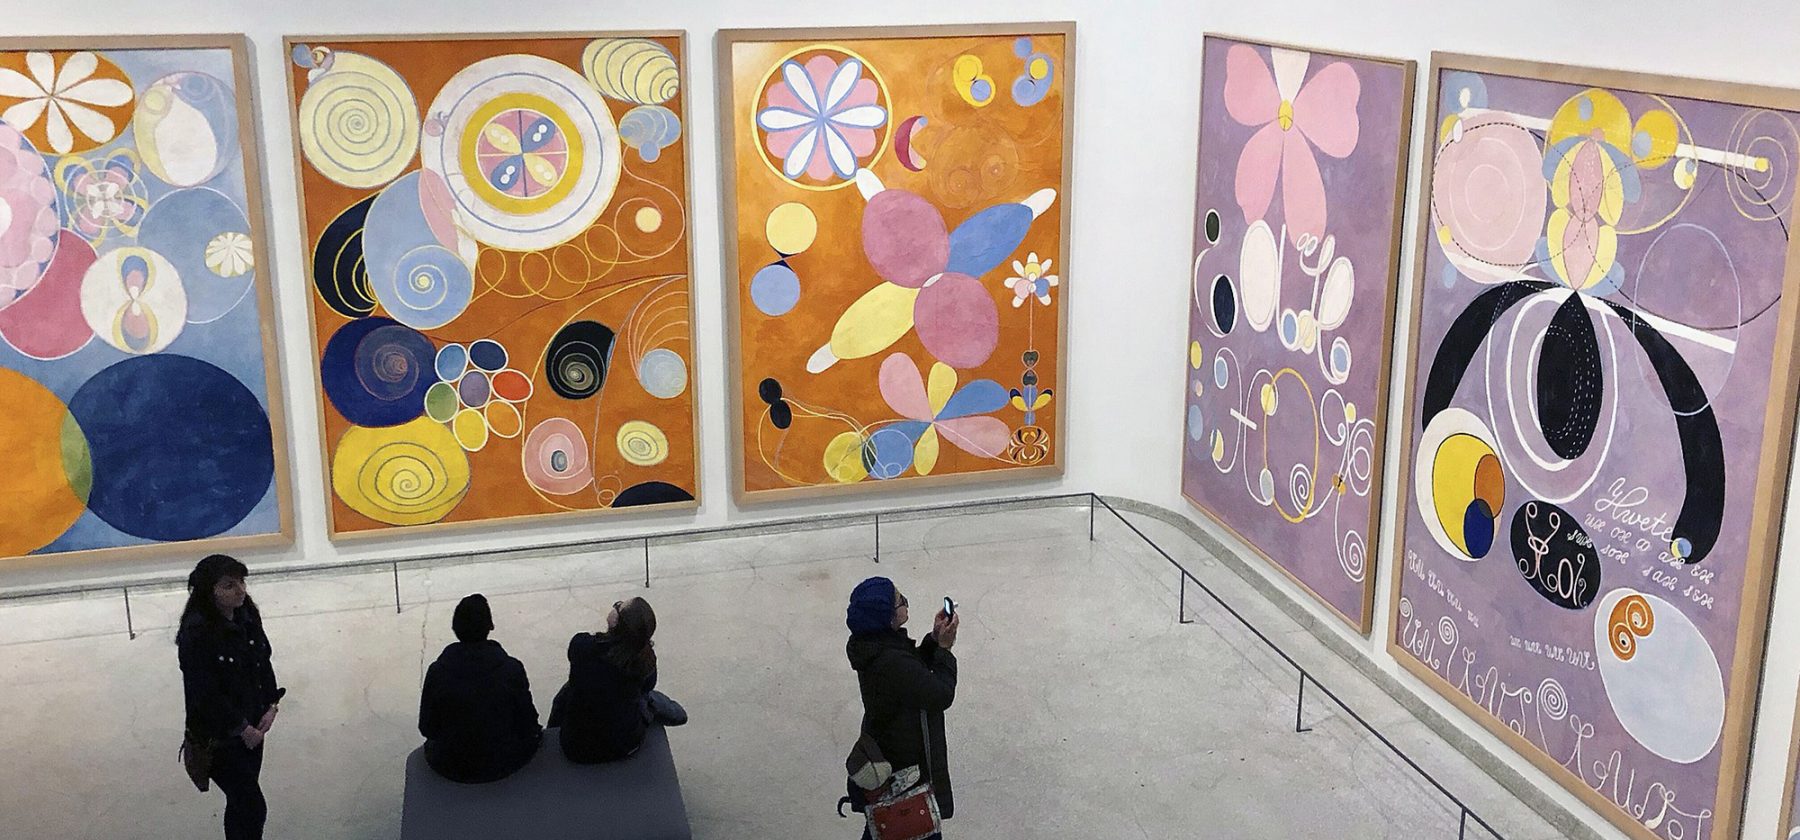 This is a photo of a woman taking a picture on her phone of Hilma af Klint’s “The Ten Largest” at the Solomon R. Guggenheim Museum in New York